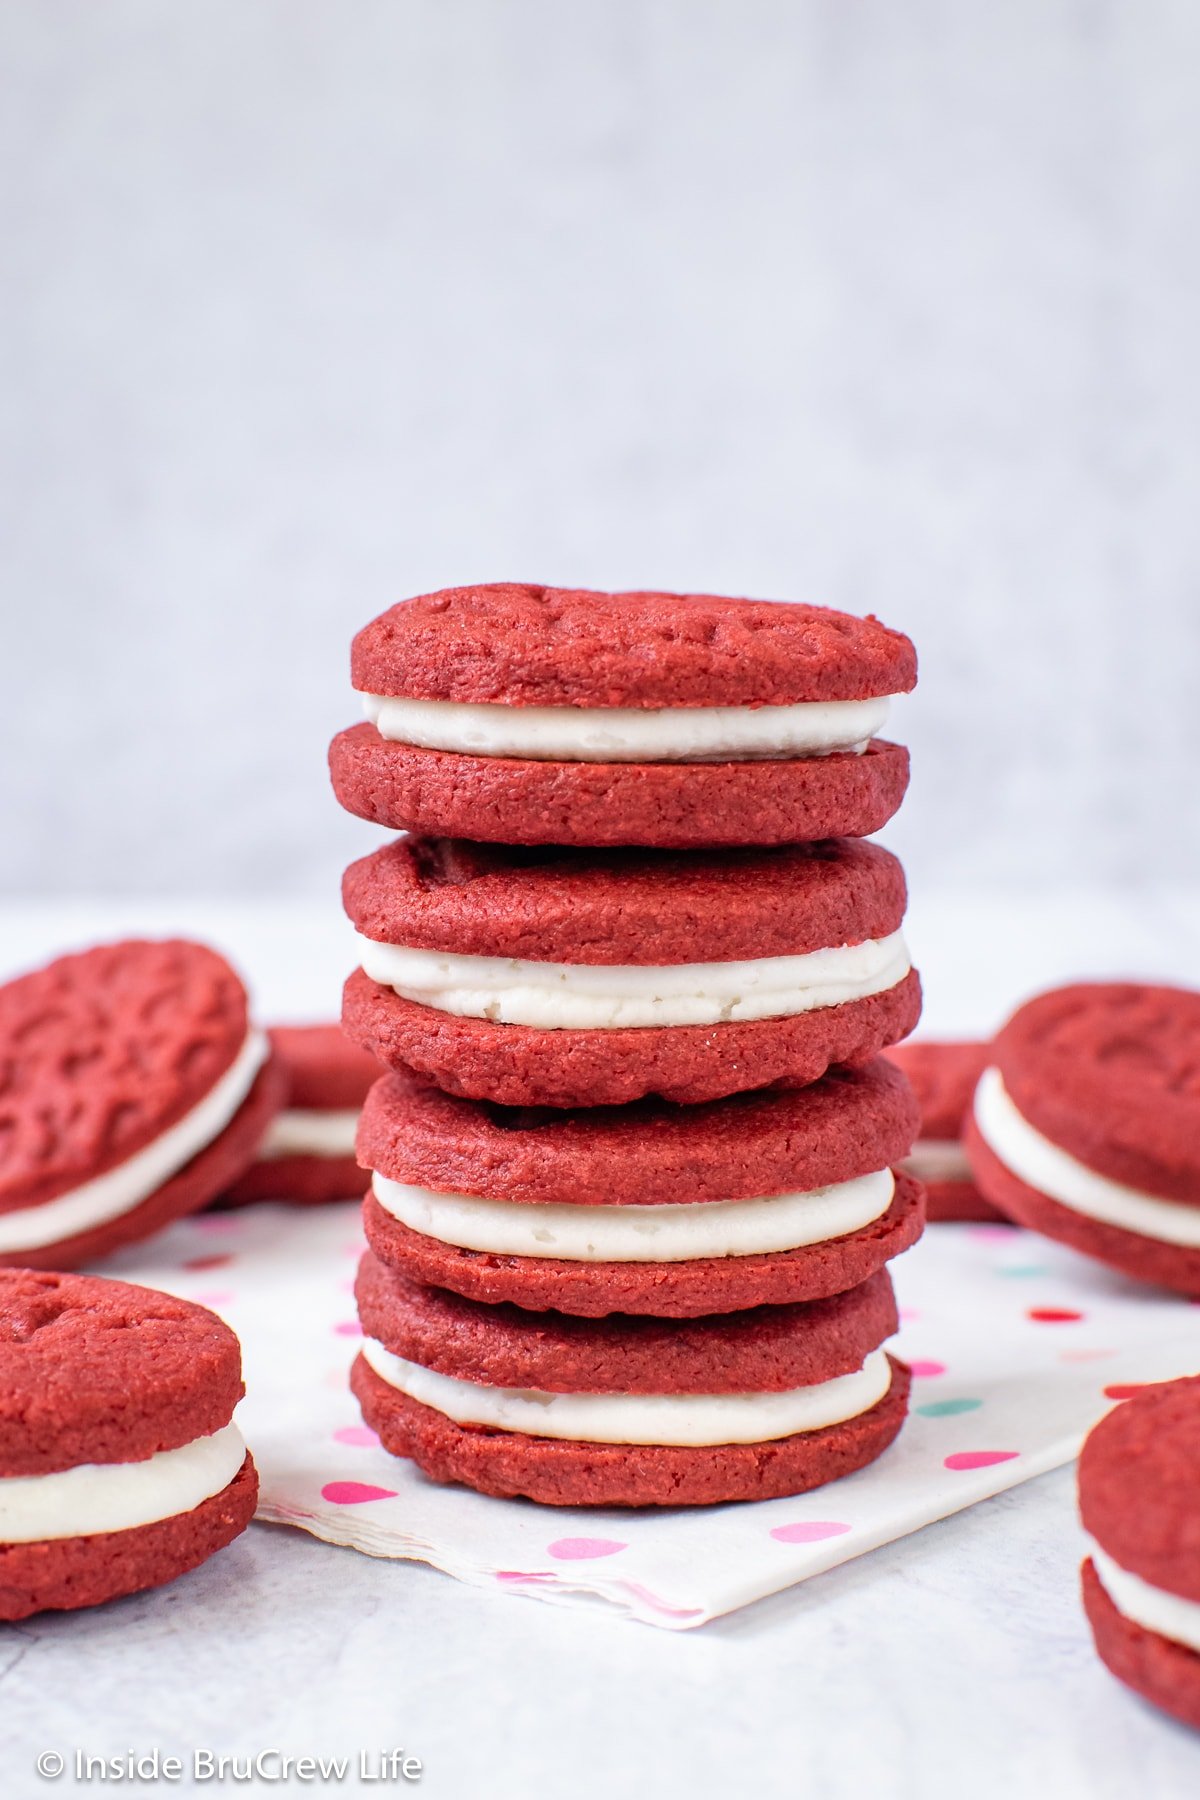 A stack of four red Oreos on a napkin.